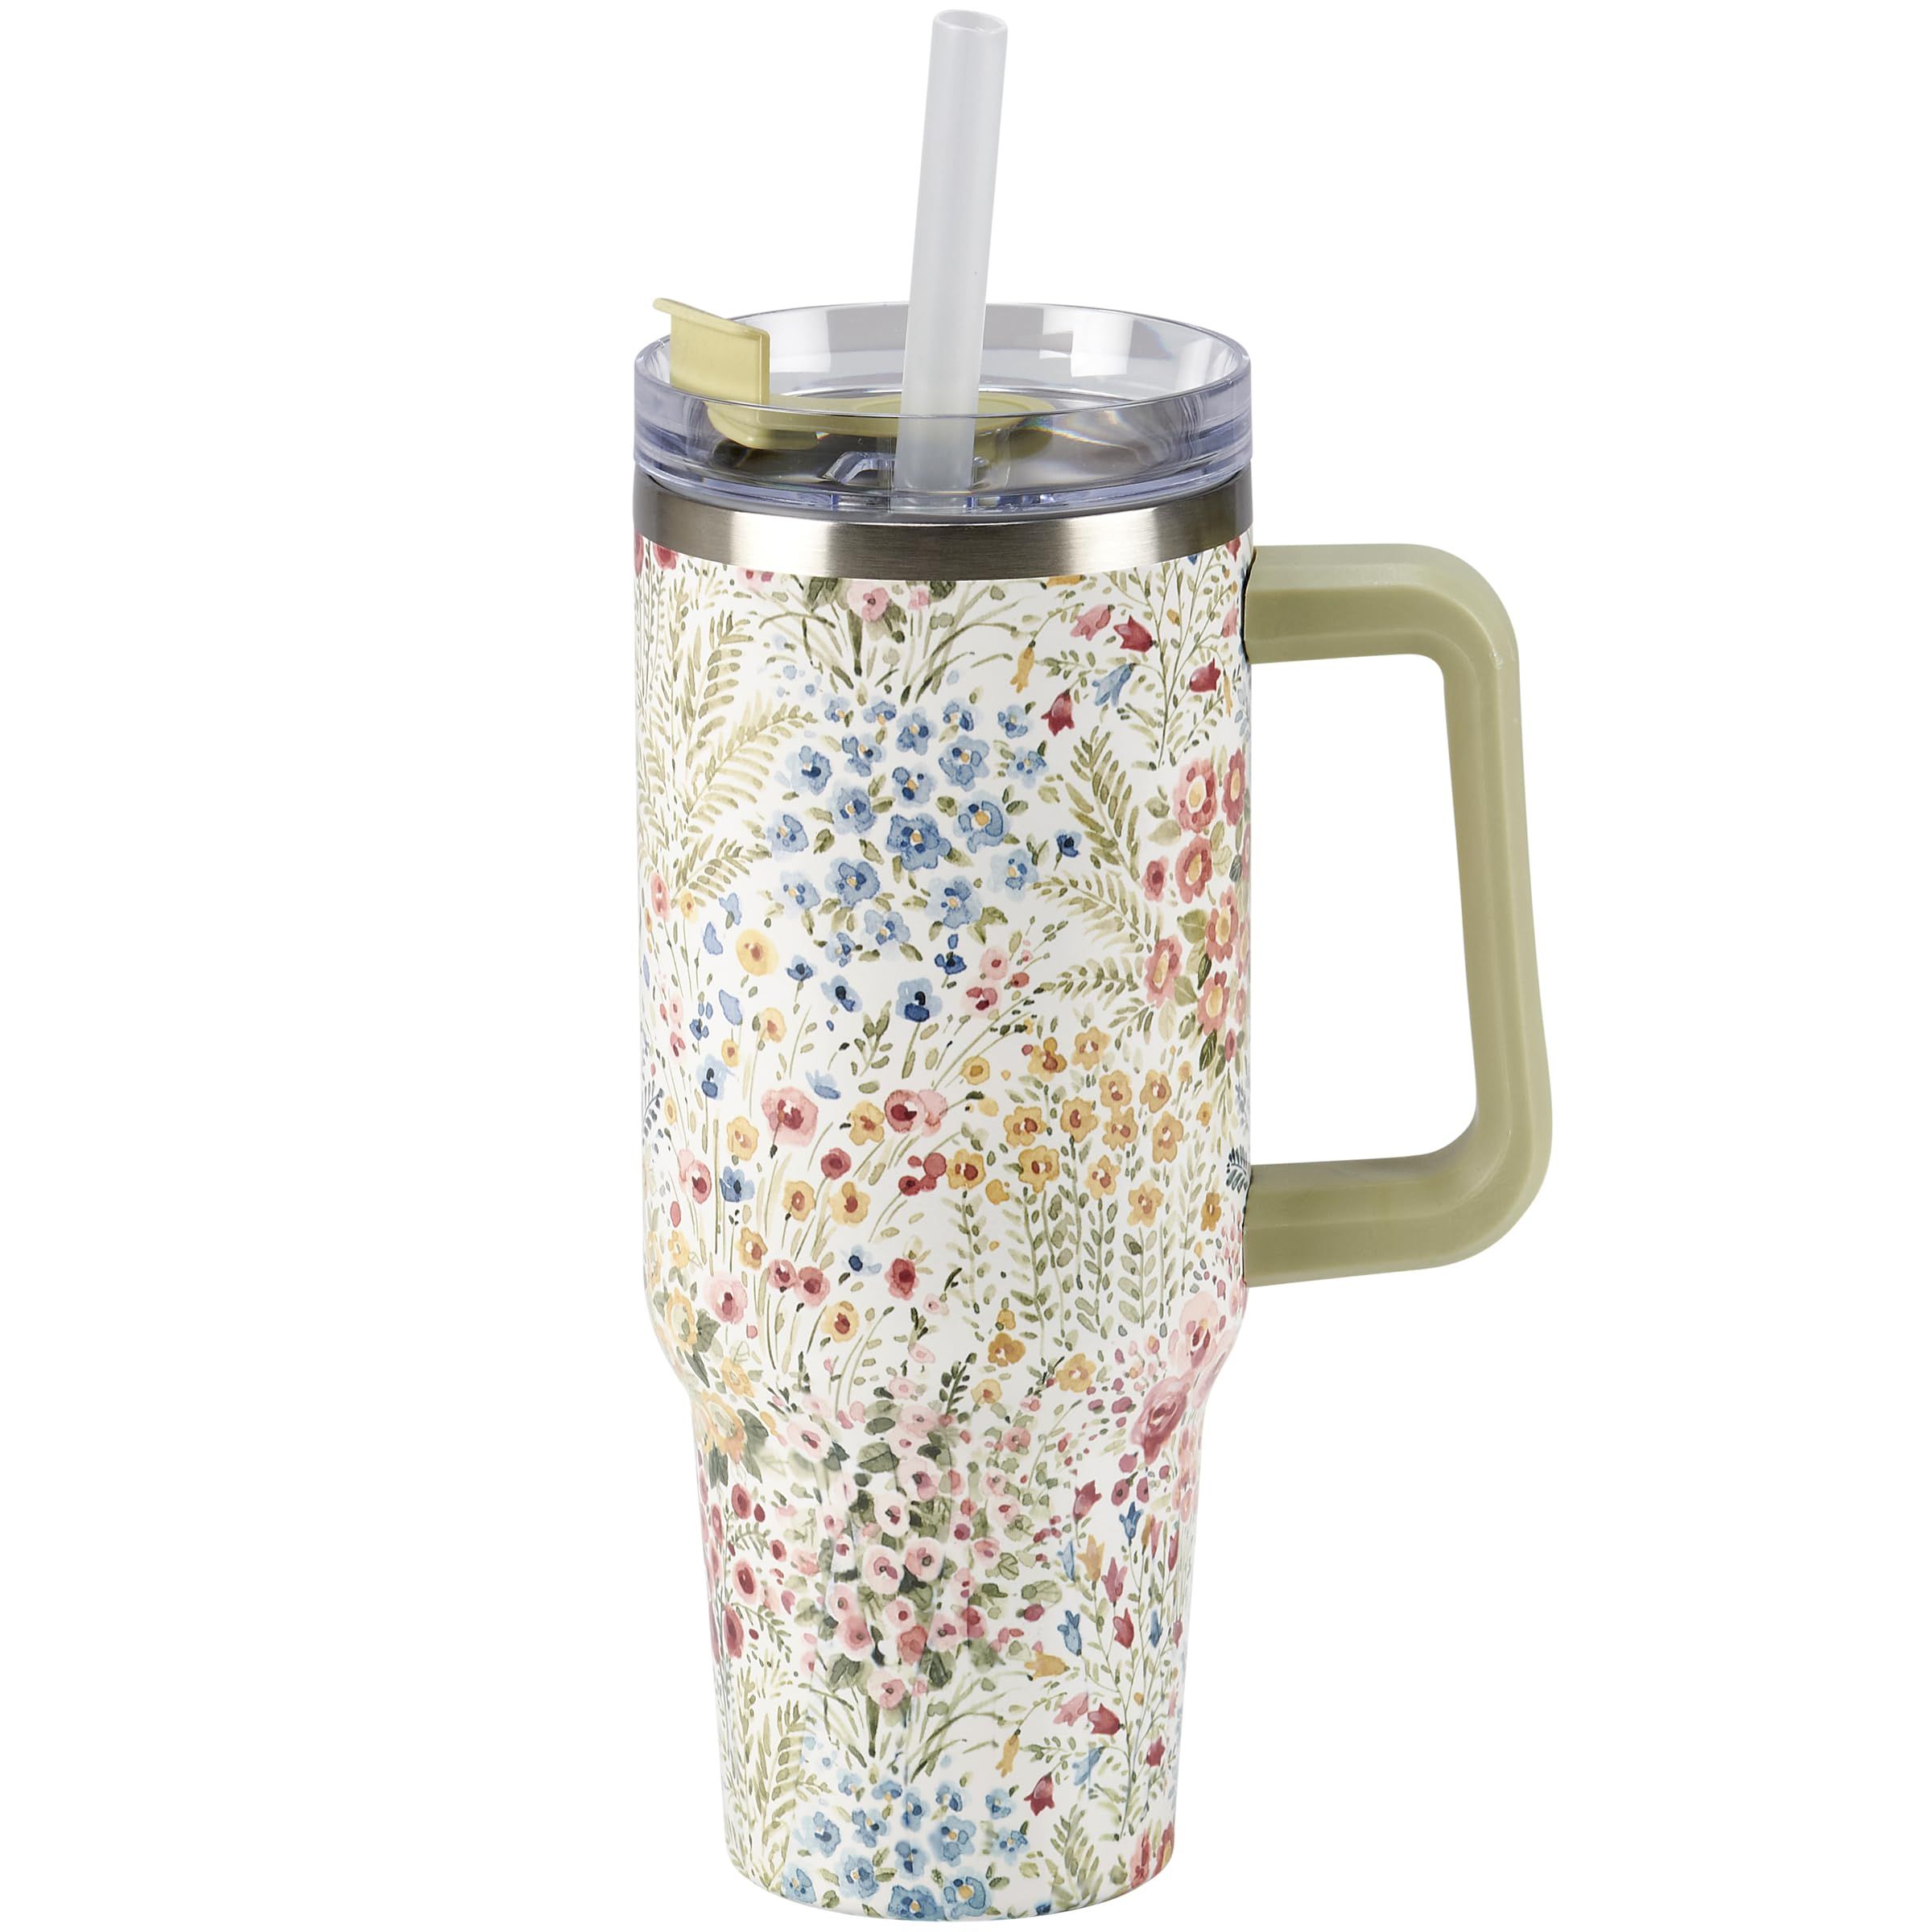 Primitives by Kathy Travel Mug - Mixed Florals in a wonderful Watercolor Style | Amazon (US)